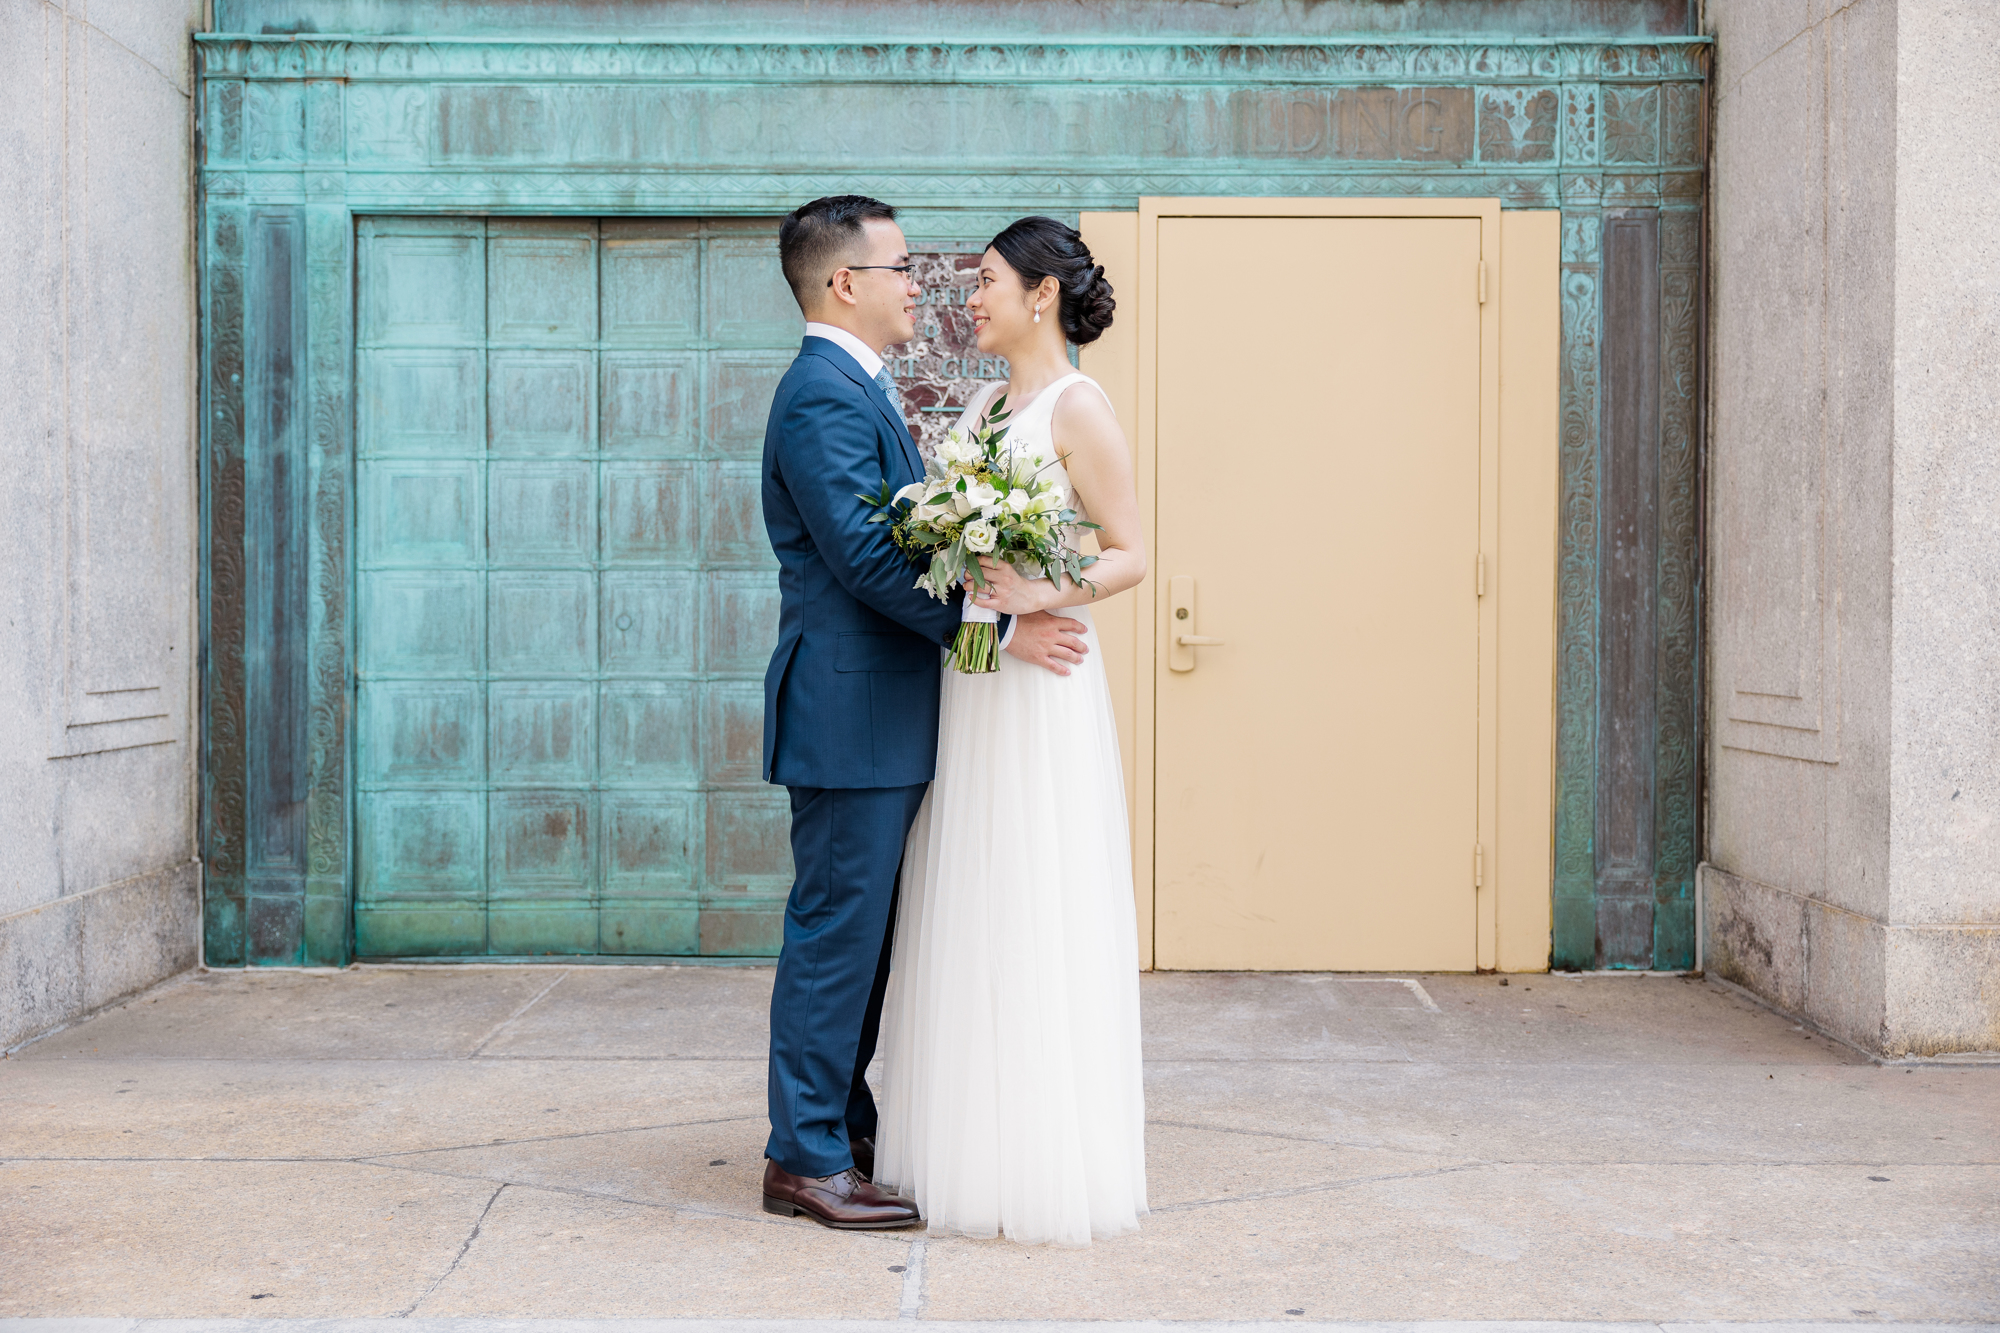 Idyllic Elopement Photos in DUMBO and Central Park New York